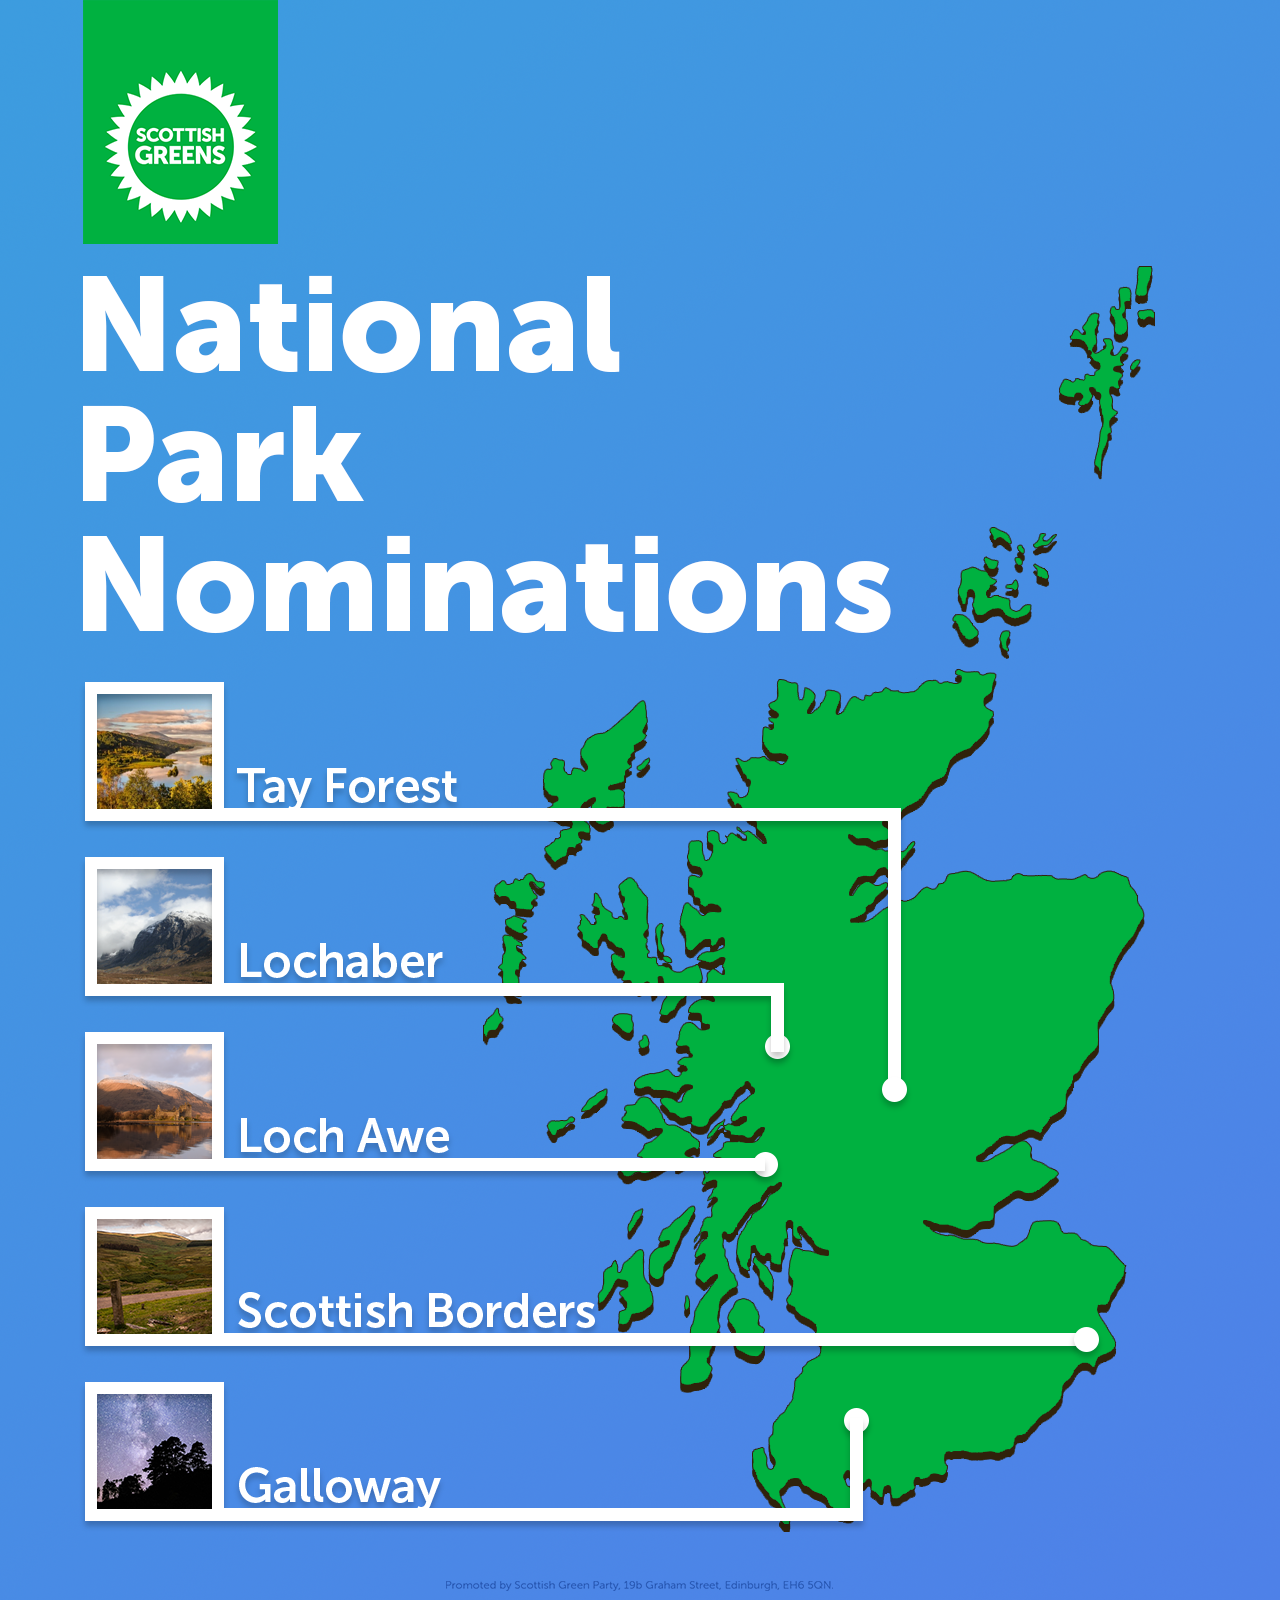 National Park nominations map showing Tay Forest, Lochaber, Loch Awe, Scotish Borders and Galloway.